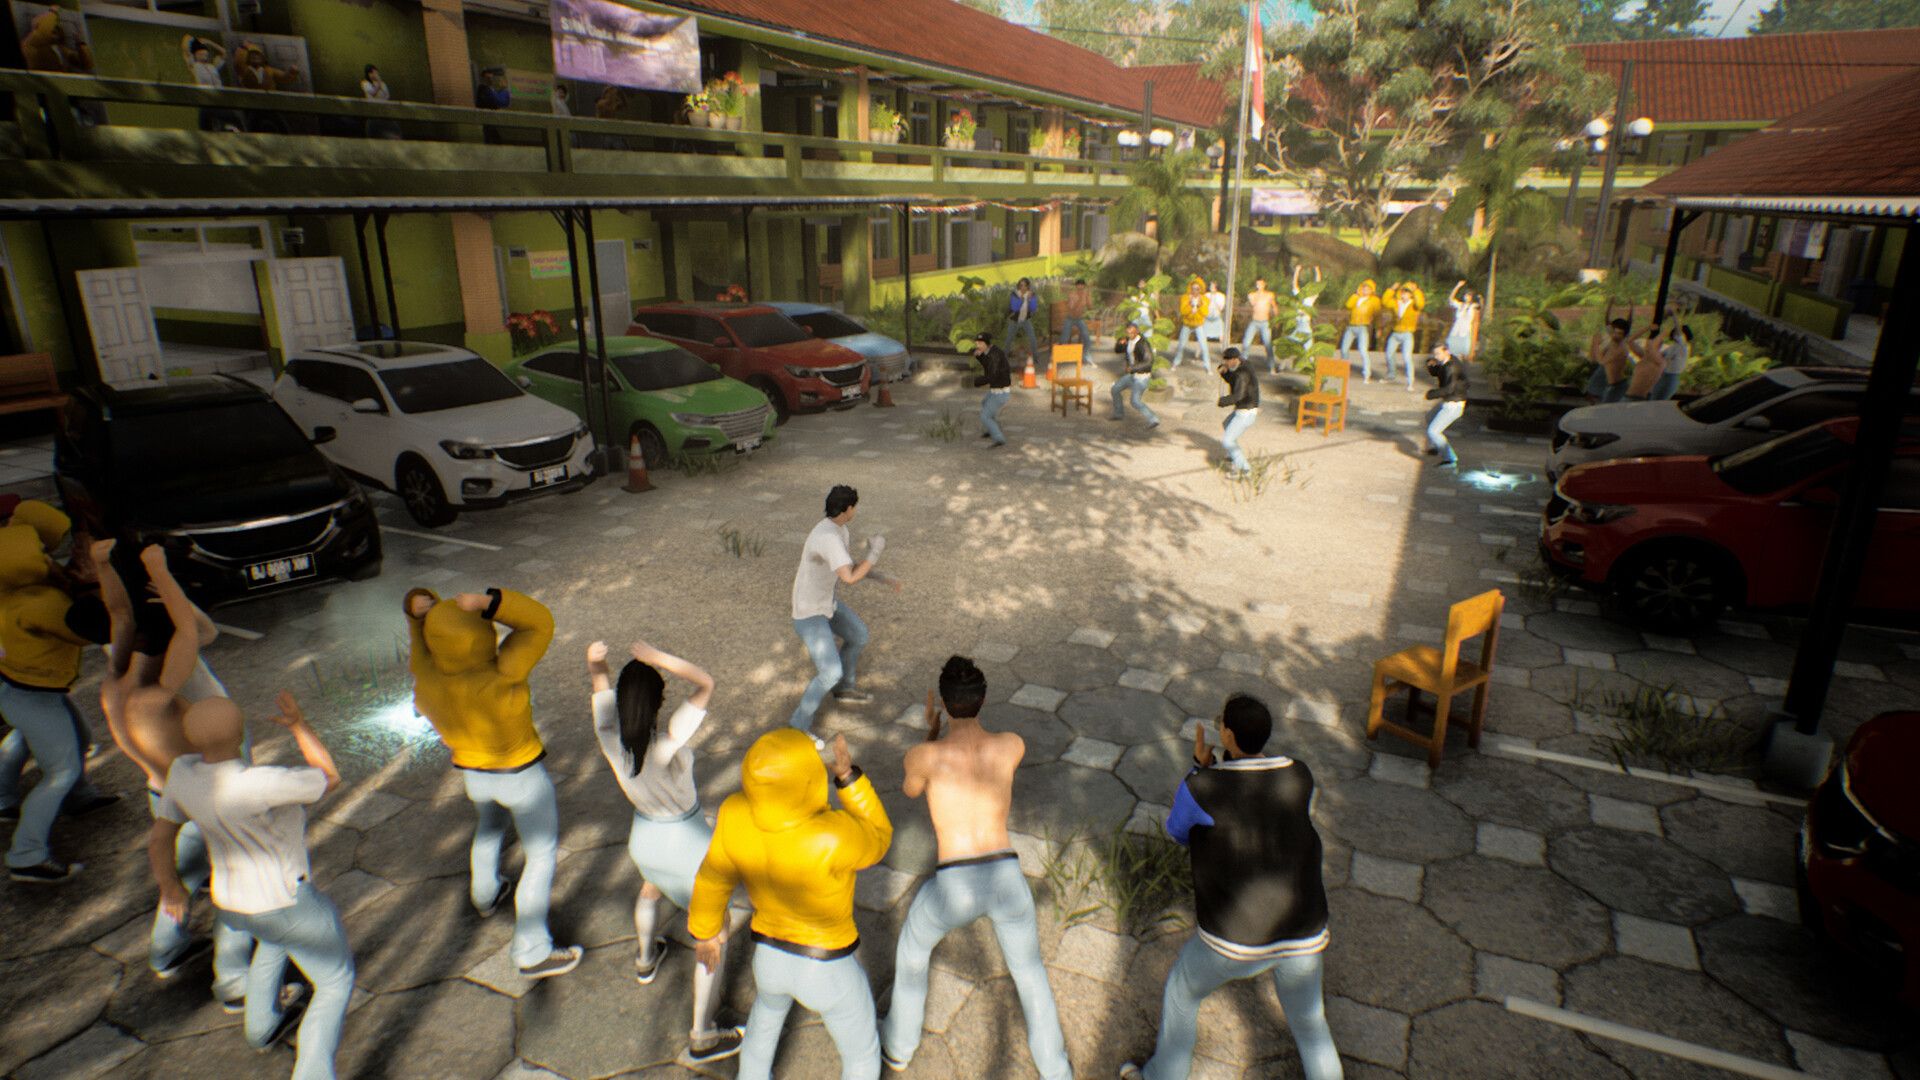 Screenshot of the game. Budi fights another student in a parking lot, surrounded by cheering students.